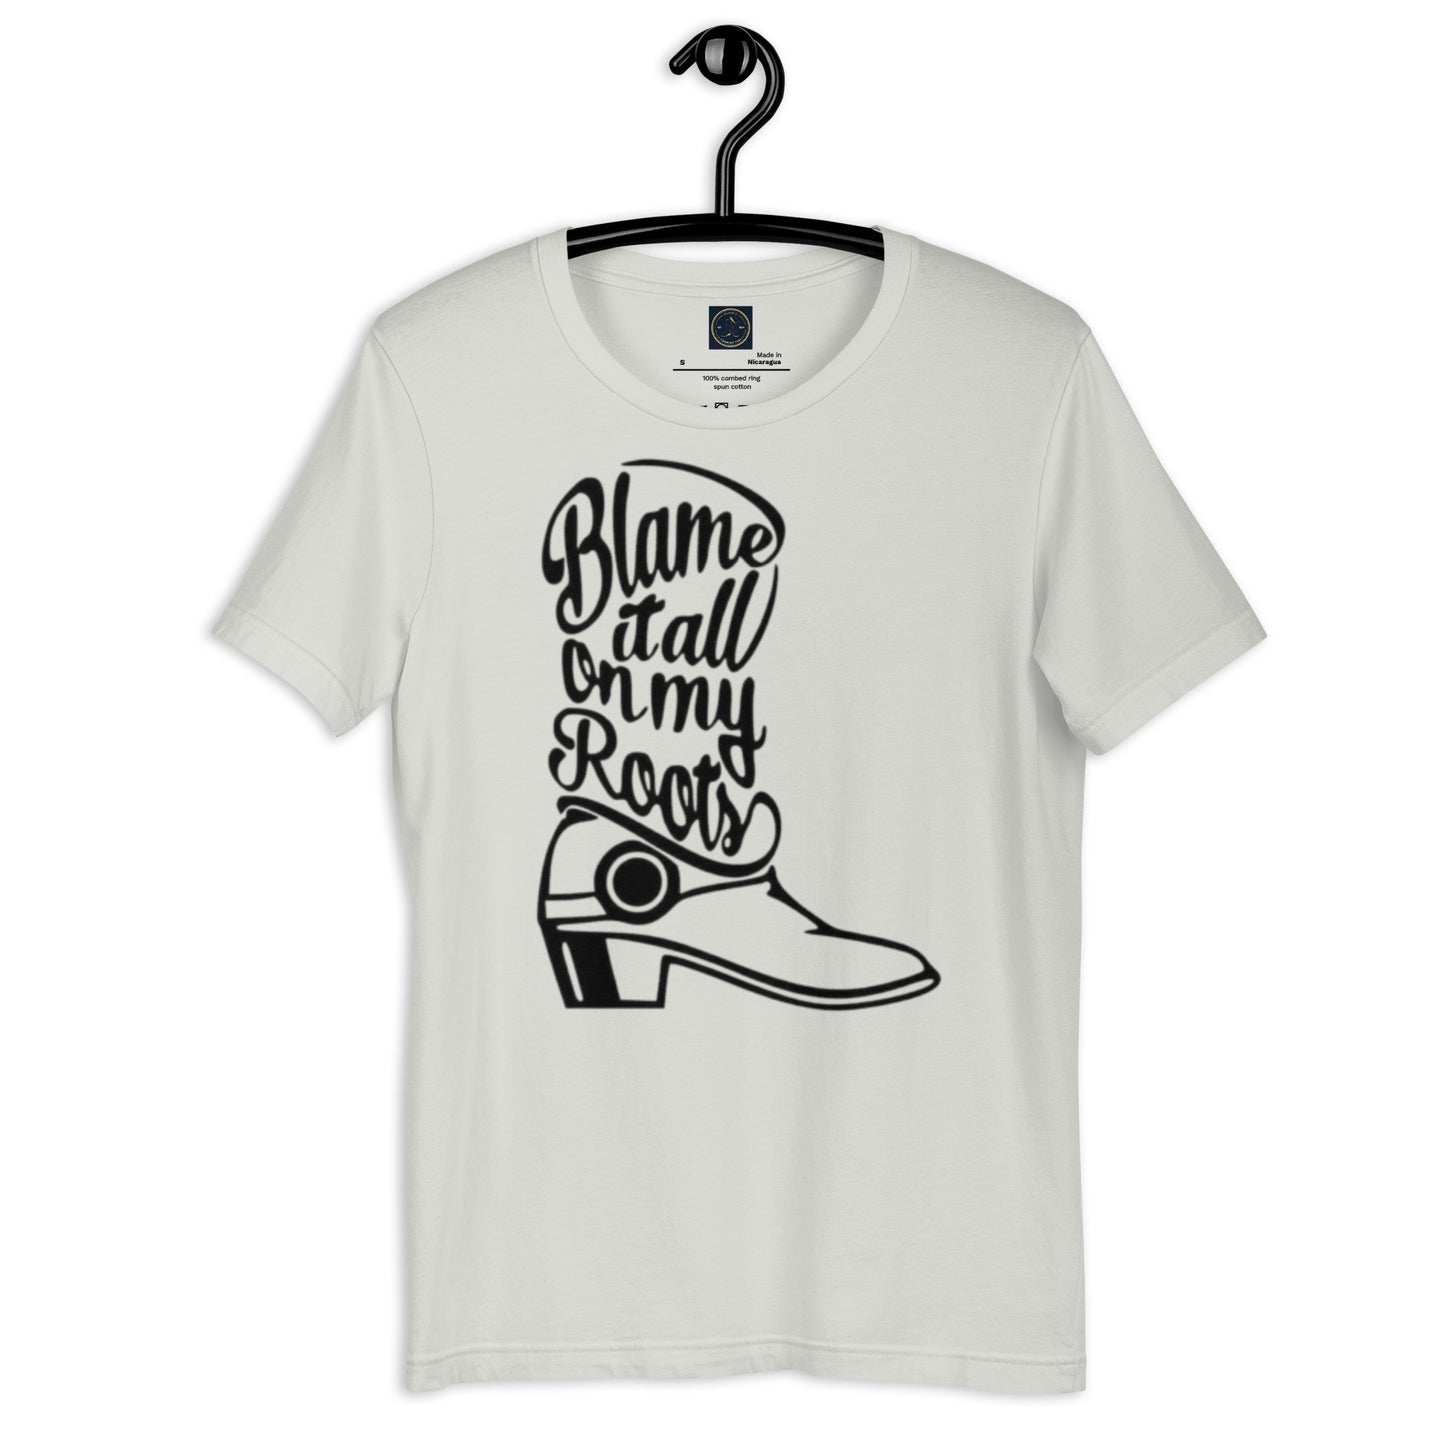 Blame It All On My Roots (alt) - Get Your Twang On with Classic Country Tees - The Ultimate Unisex T-Shirt for True Country Souls! - Classic Country Tees